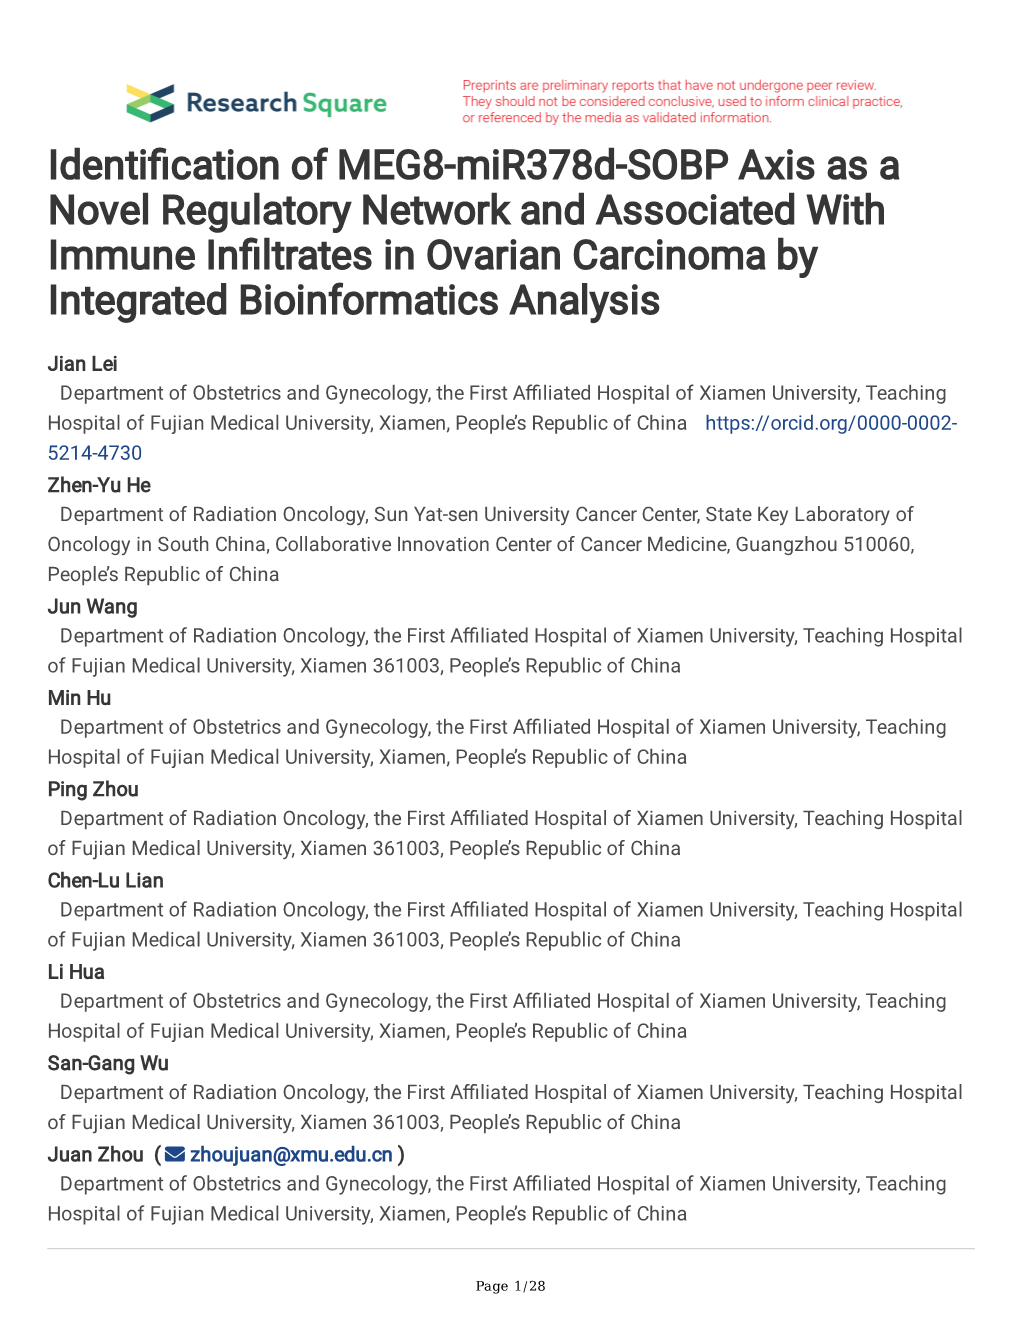 Identification of MEG8-Mir378d-SOBP Axis As a Novel Regulatory Network and Associated with Immune Infiltrates in Ovarian Carcinoma by Integrated Bioinformatics Analysis